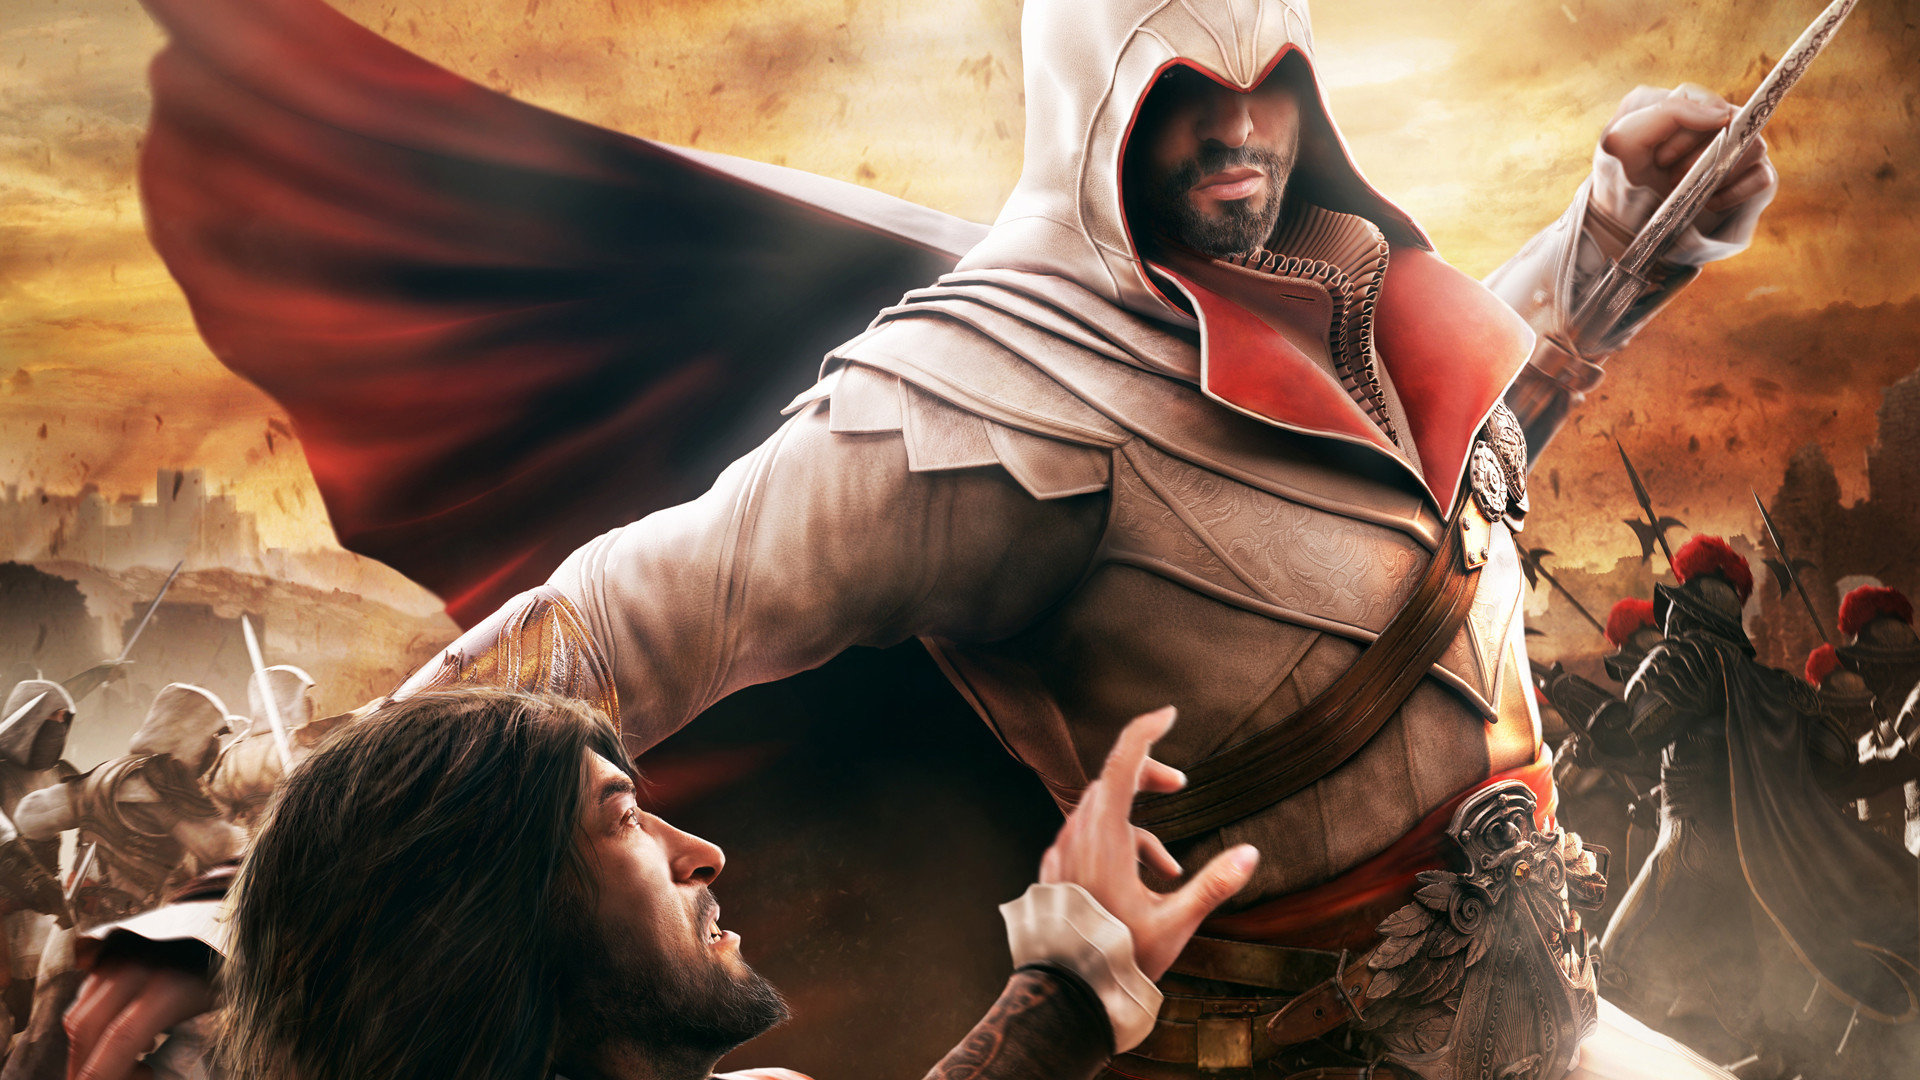 Awesome Assassin's Creed free wallpaper ID:188260 for full hd 1920x1080 desktop